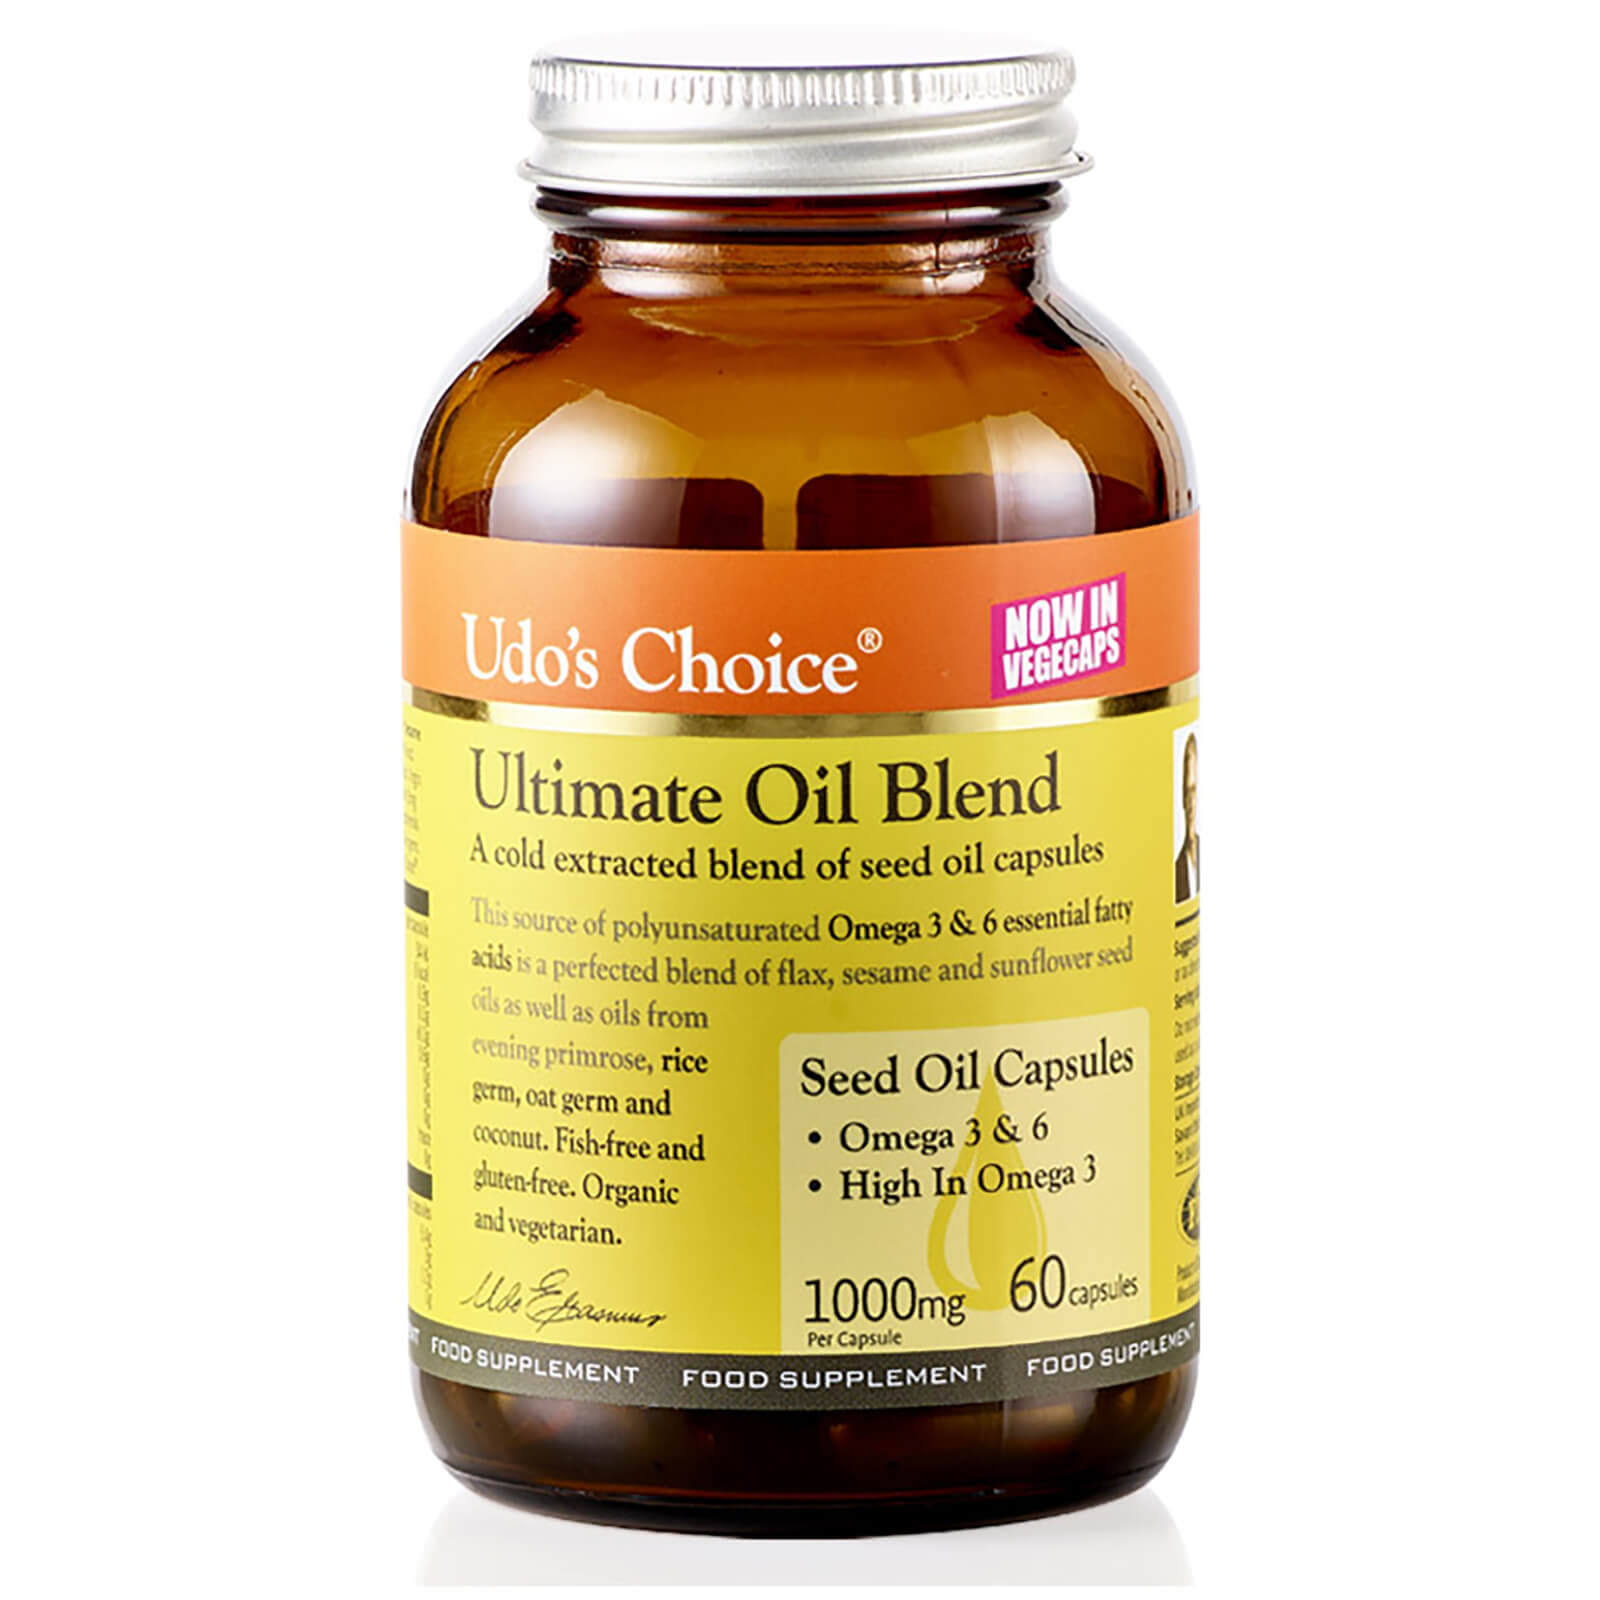 Udos Choice Ultimate Oil Blend - 60ct